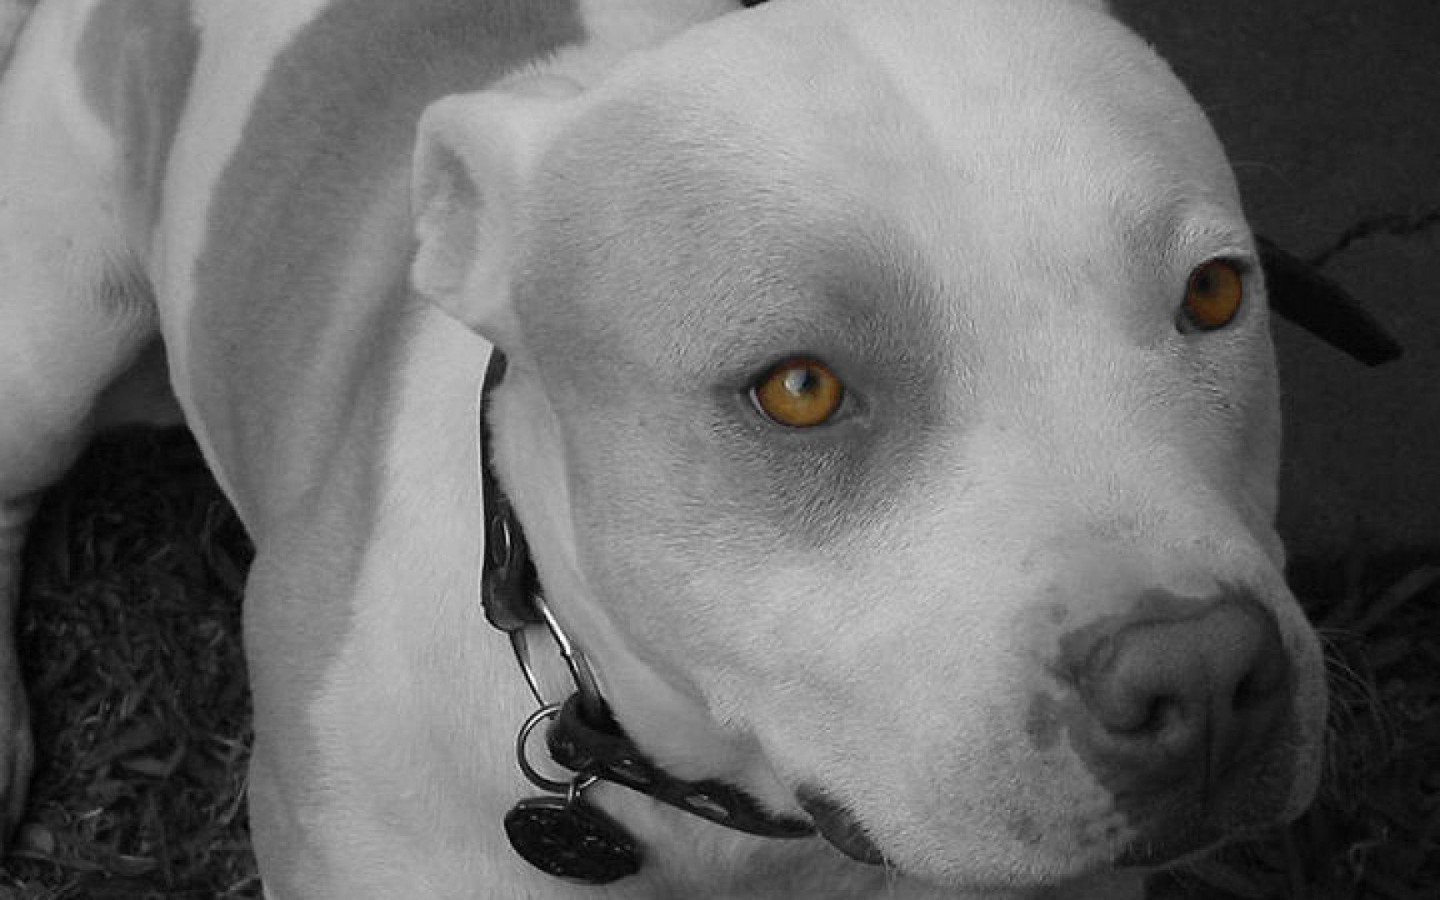 Pit Bull Wallpapers